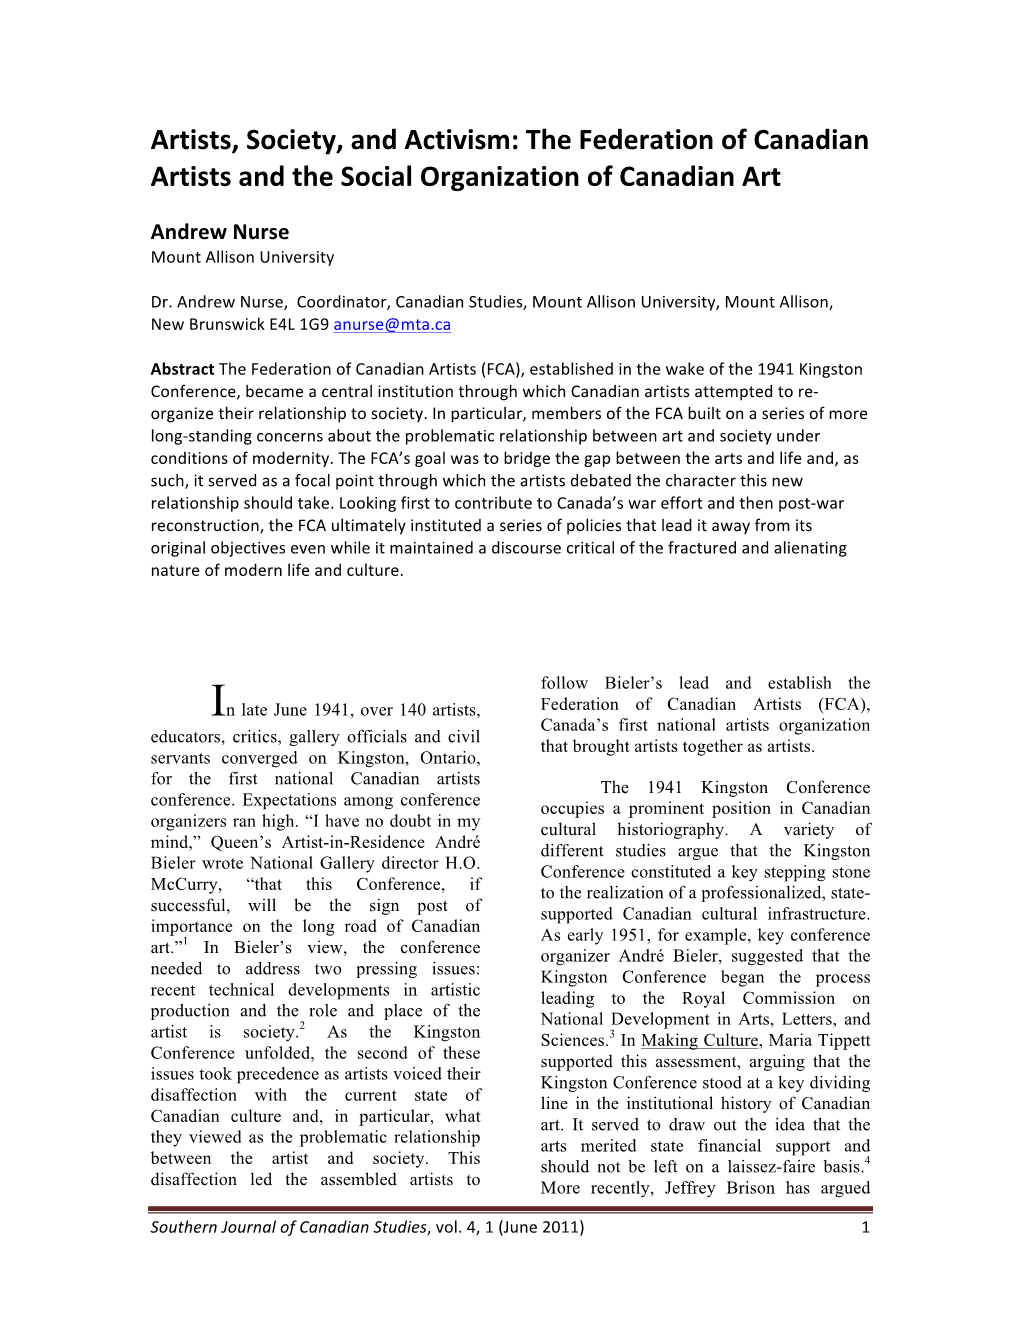 Artists, Society, and Activism: the Federation of Canadian Artists and the Social Organization of Canadian Art